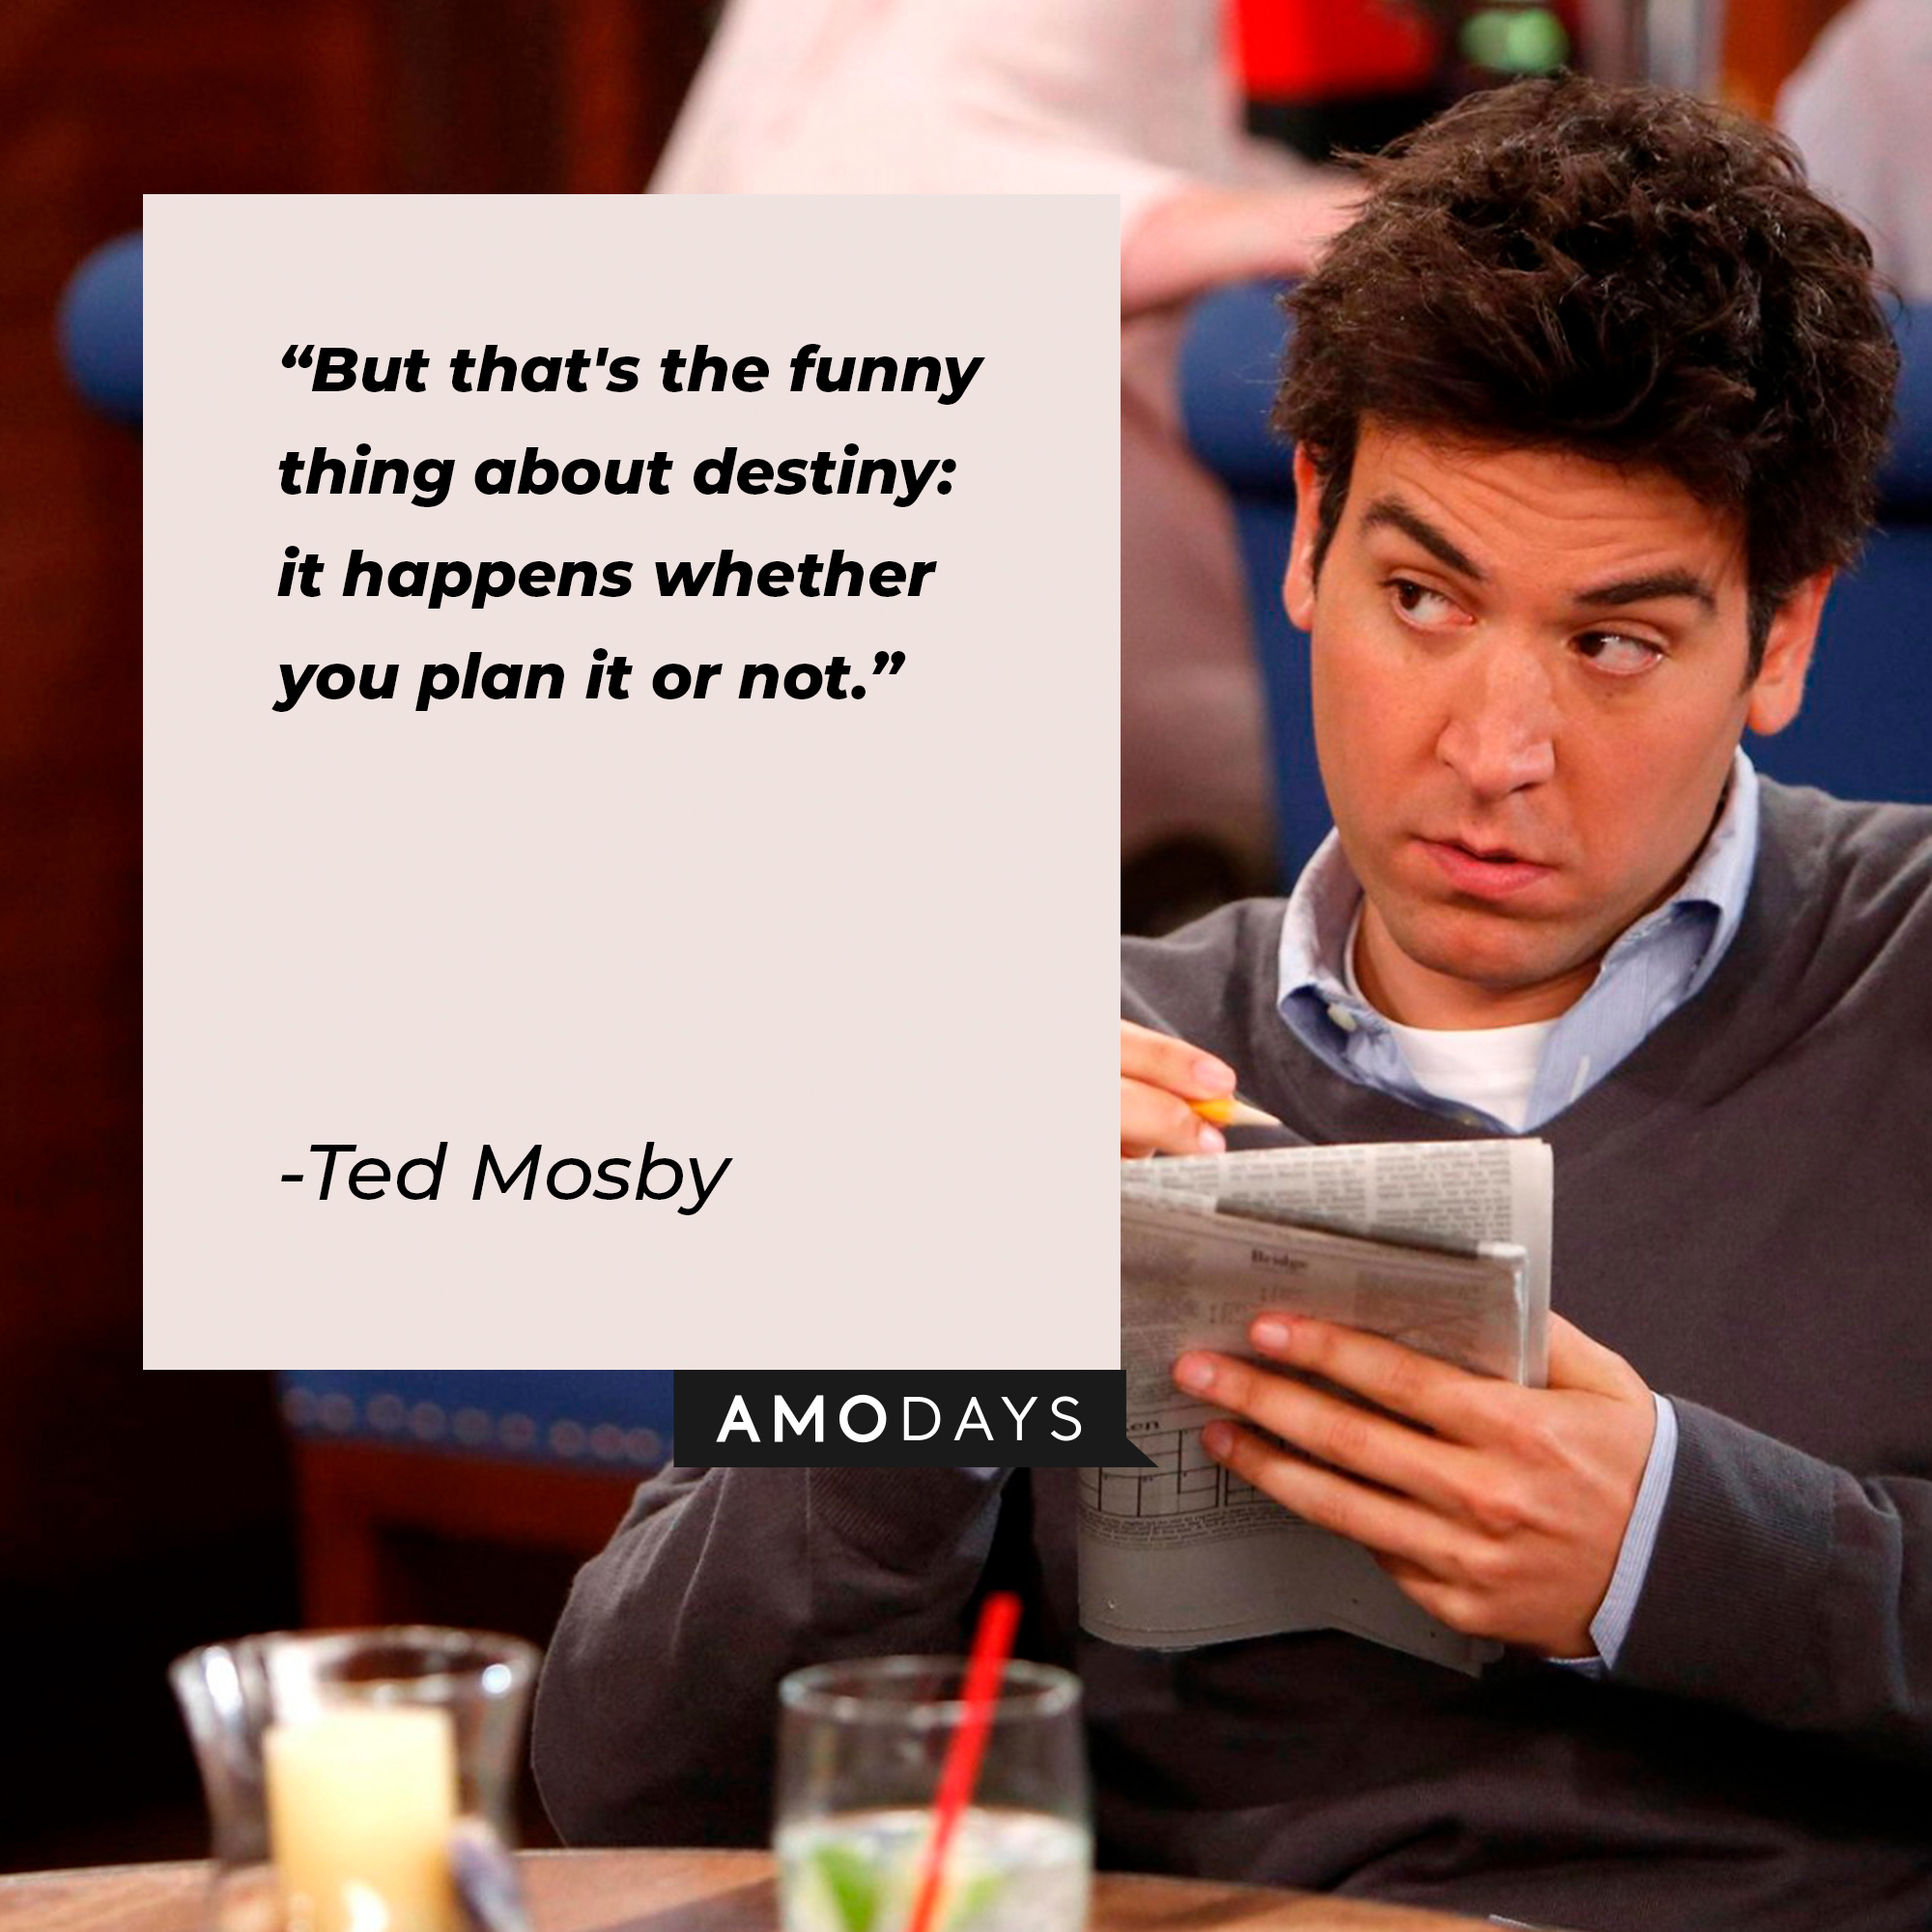 A picture of Ted Mosby with his quote,  “But that's the funny thing about destiny: it happens whether you plan it or not." | Source: facebook.com/OfficialHowIMetYourMother